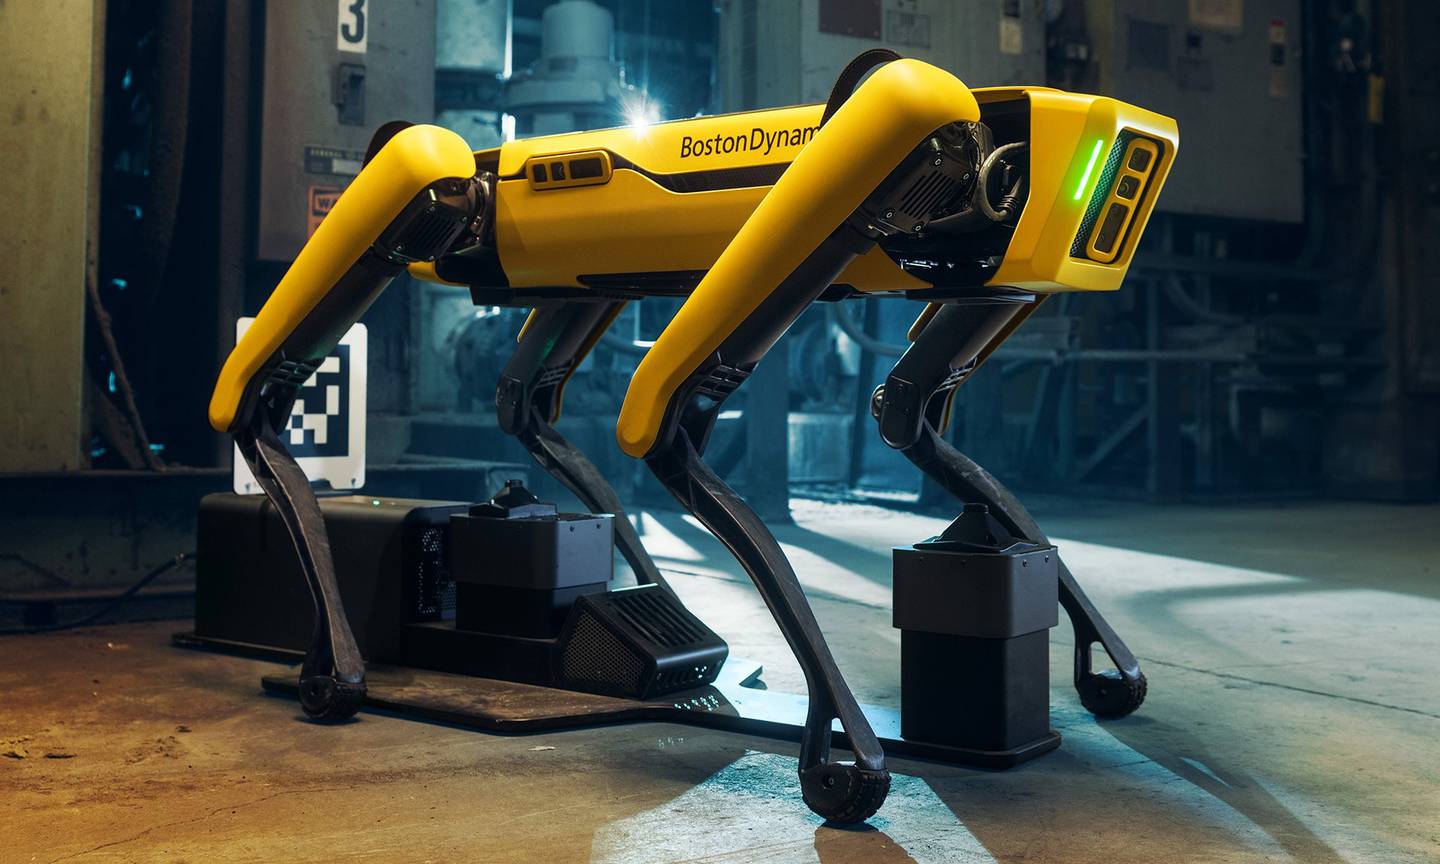 Spot, the Boston Dynamics robot dog, is one of the best-known animal robots today